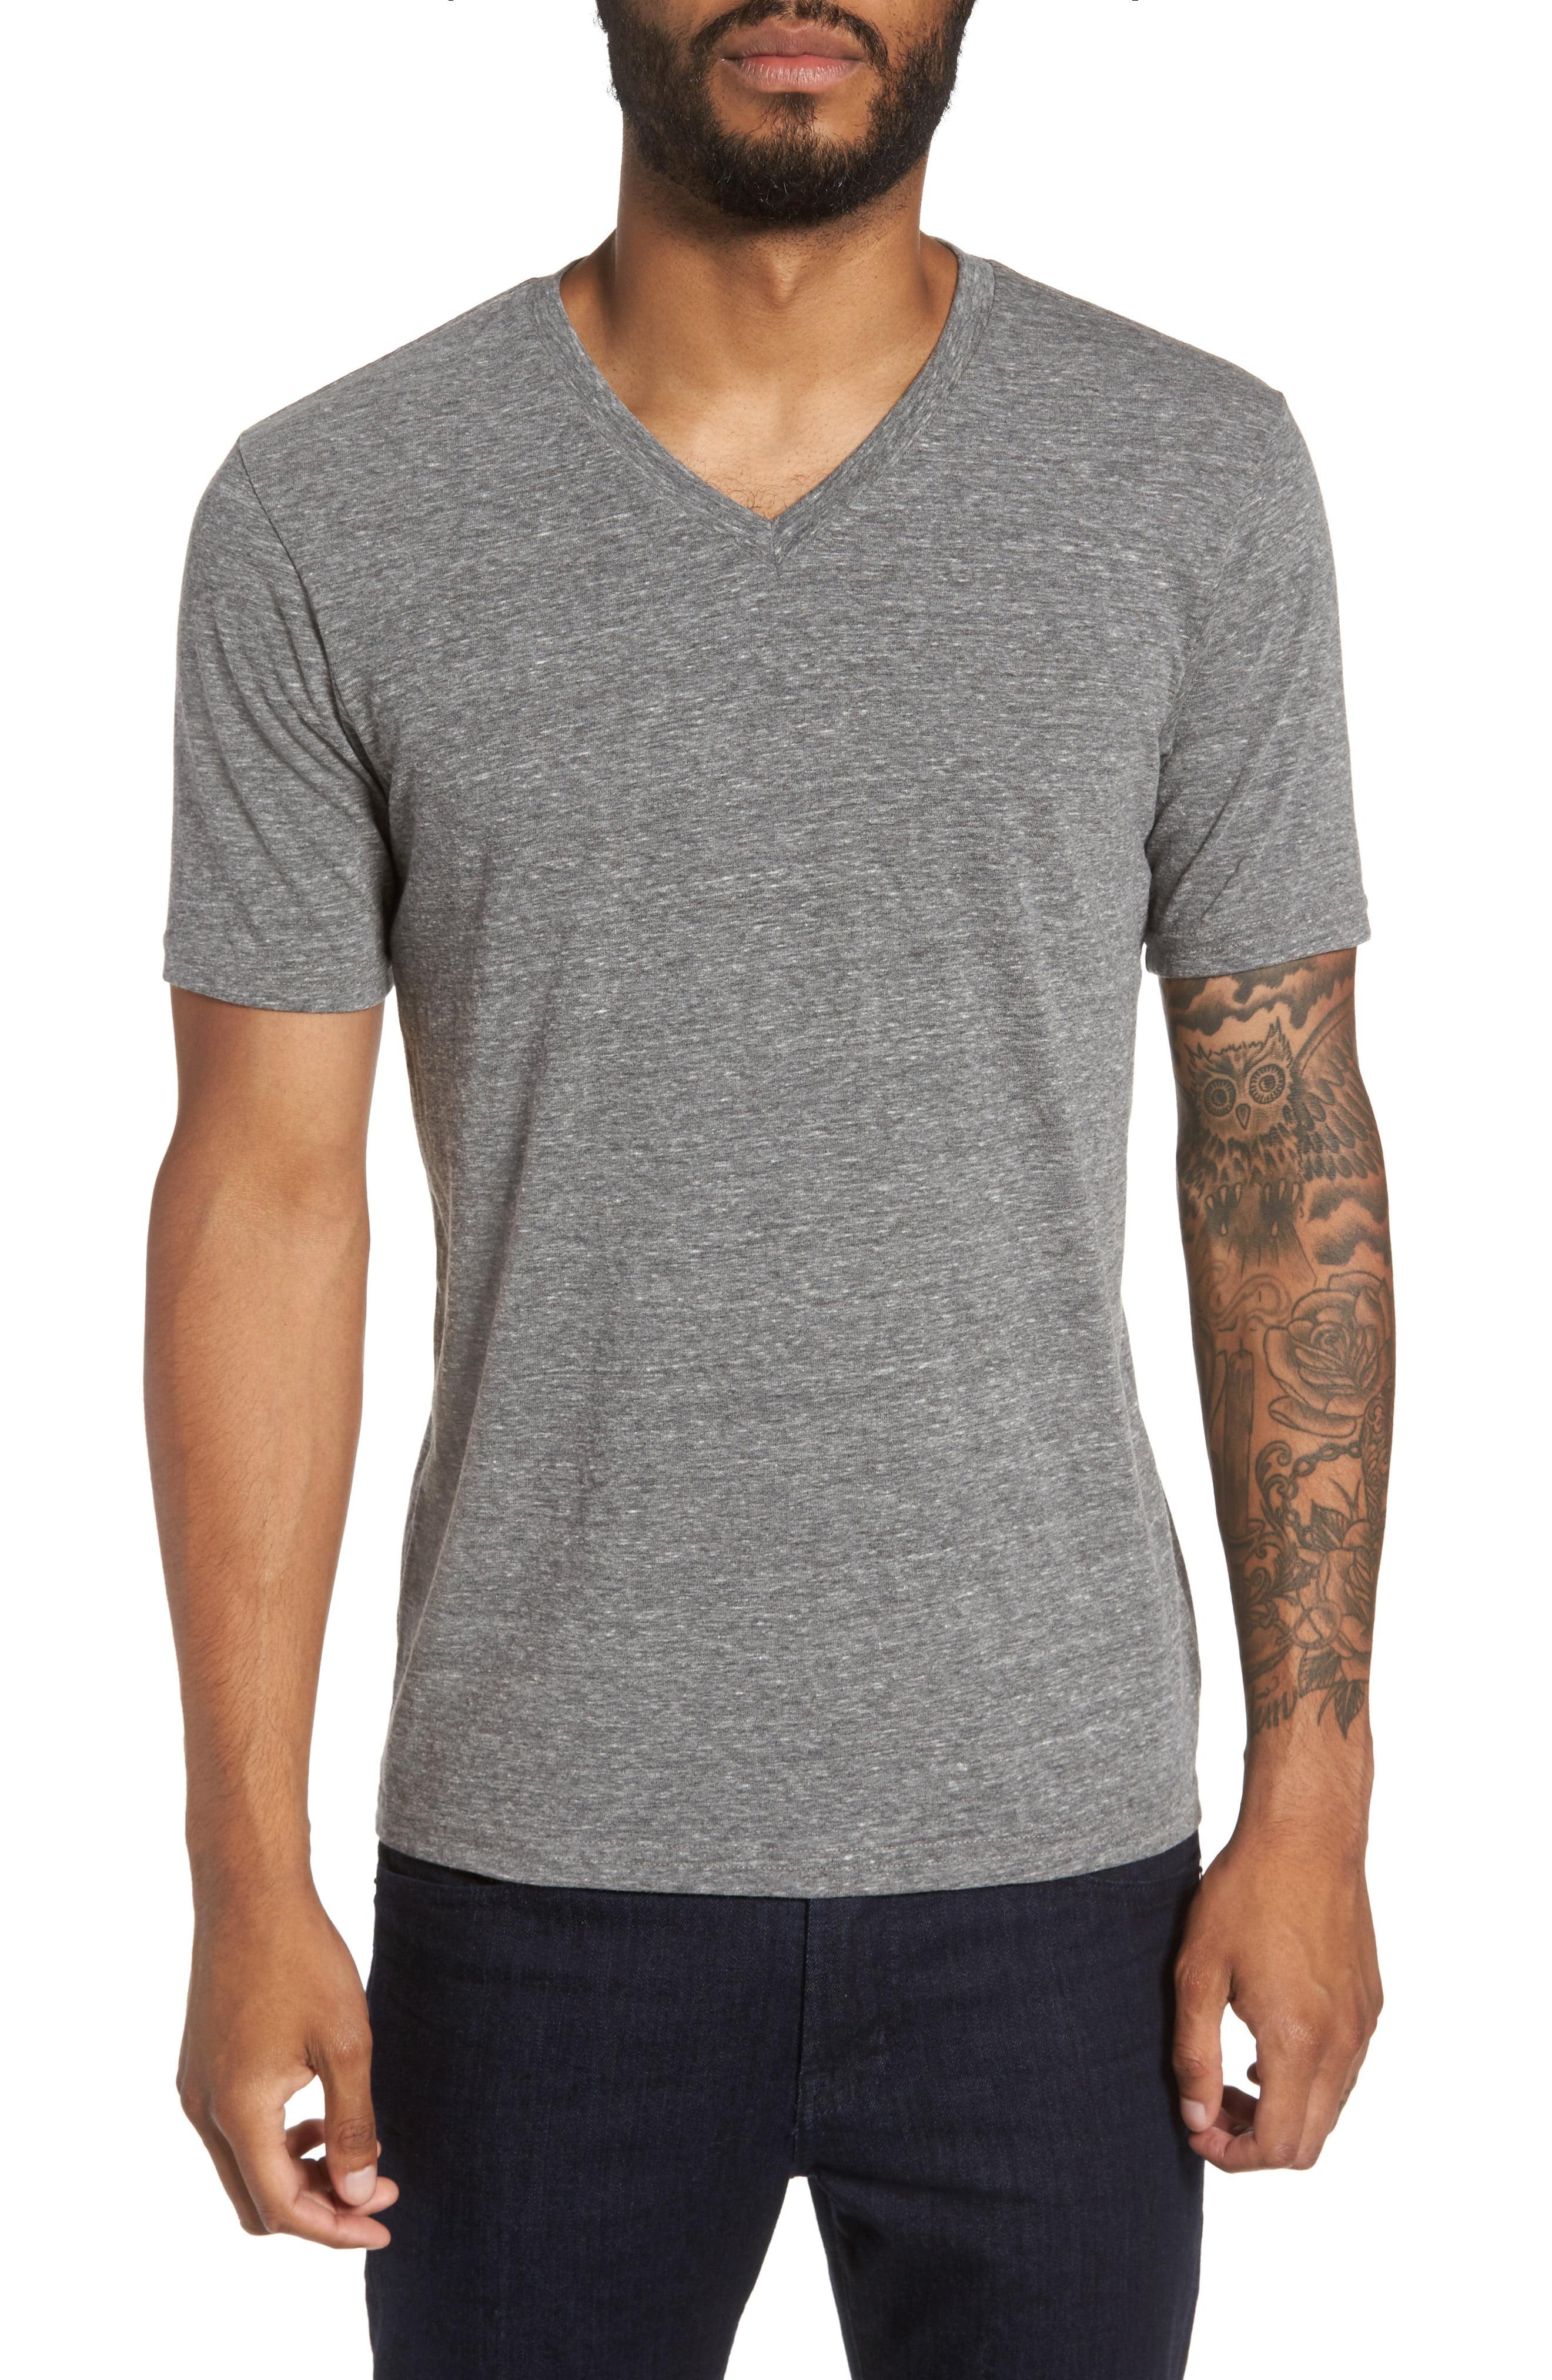 Goodlife Classic Supima Cotton Blend V-neck T-shirt in Heather Grey ...